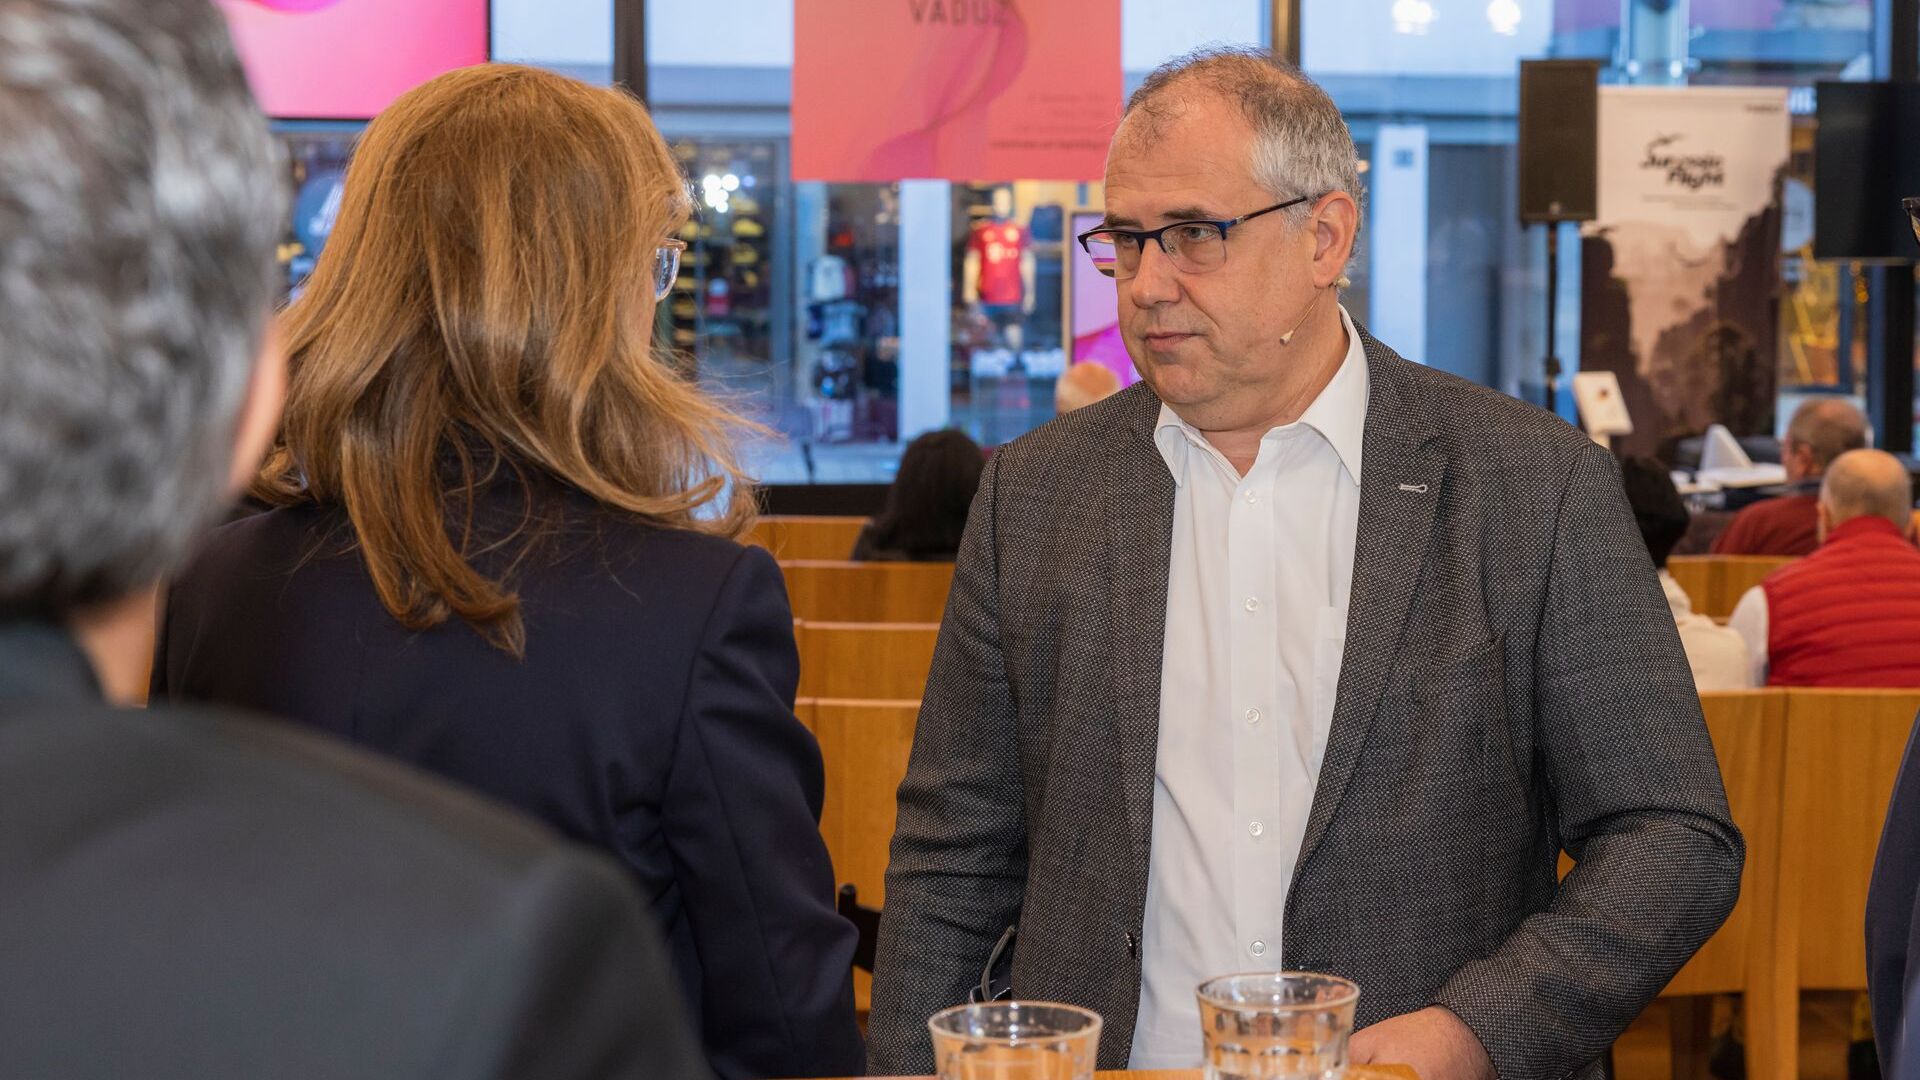 The "Digitaltag Vaduz" was welcomed by the Kunstmuseum of the capital of the Principality of Liechtenstein on Saturday 6 November 2021: in conversation Sabine Mounani, Deputy Prime Minister, and Manfred Bischof, Mayor of the capital